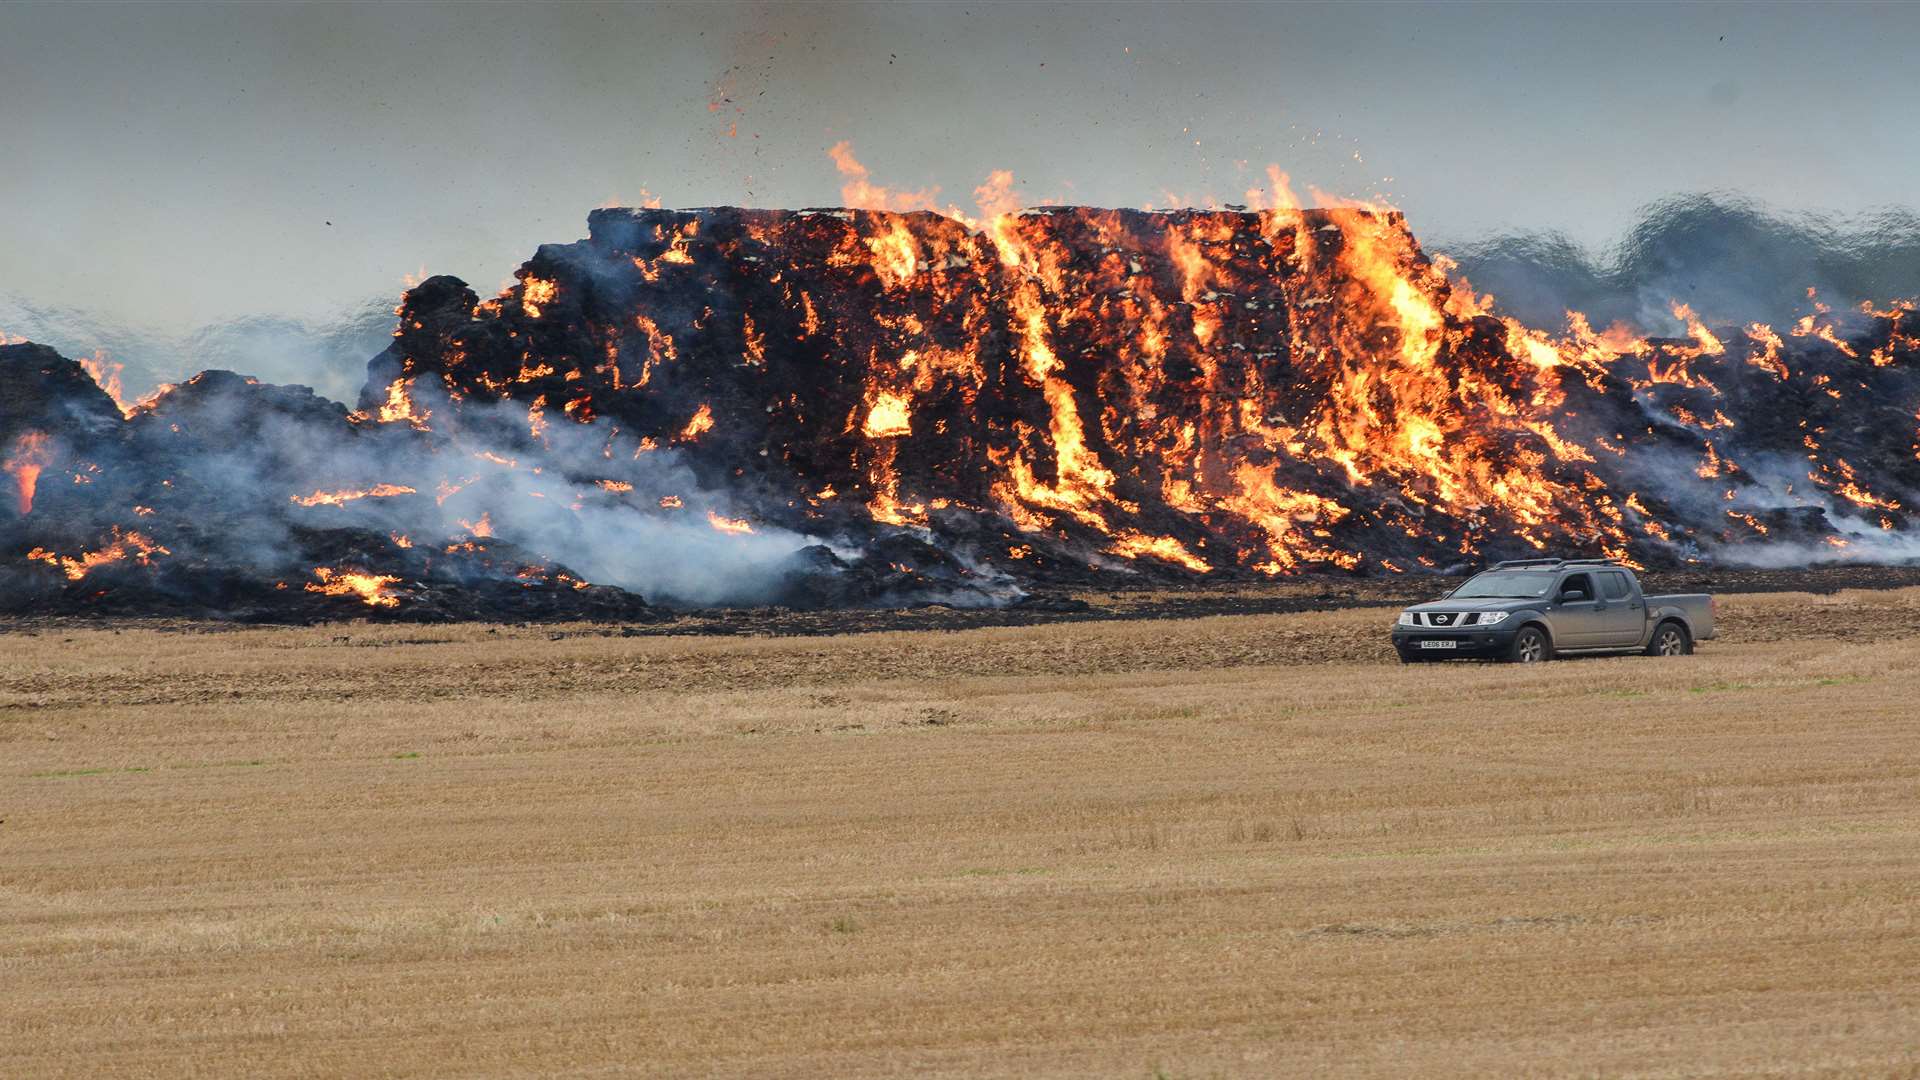 Stock Image: A large haystack ignited in flames in a field in Eythorne two years ago